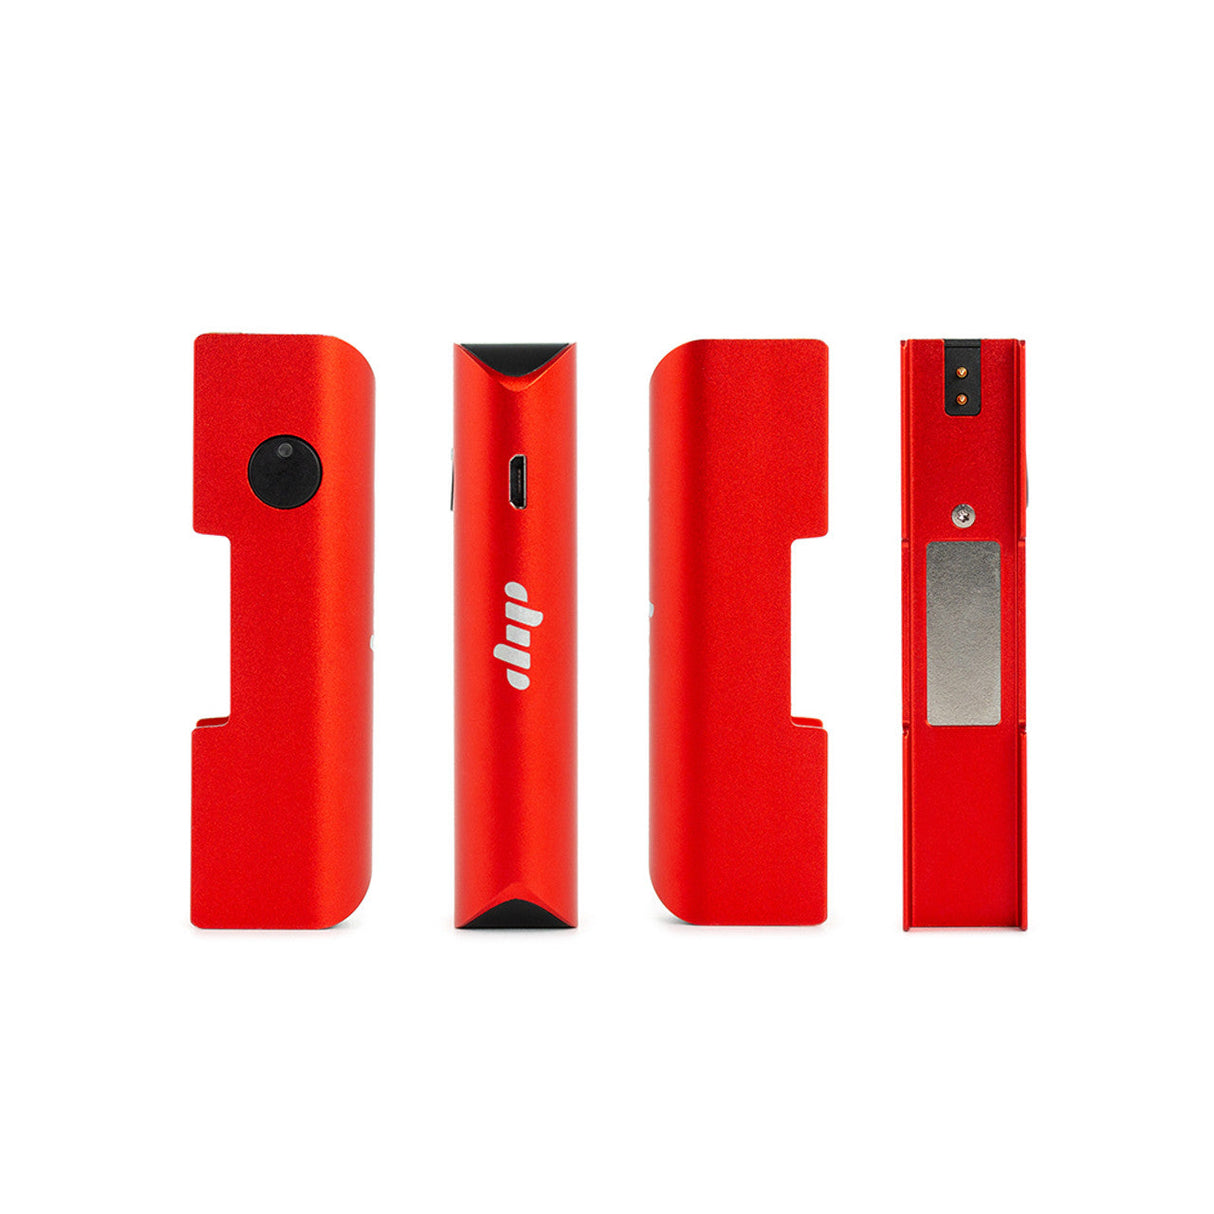 Dip Devices Evri Starter Kit in red, portable vaporizer for concentrates, battery-powered, front view